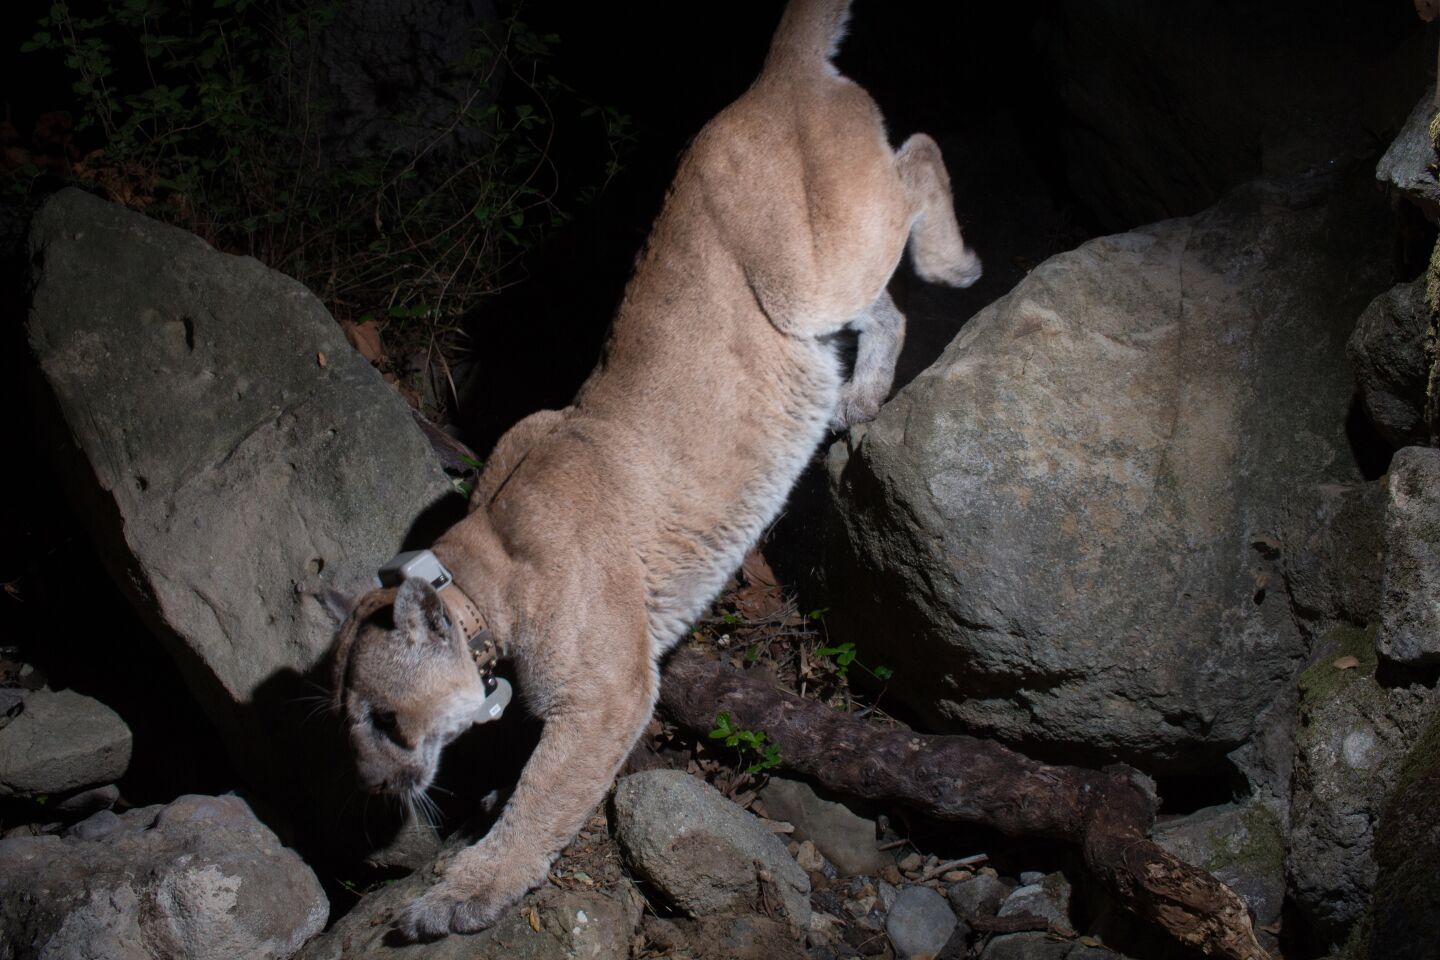 Resident cougar P-22 in Los Angeles' Griffith Park in the wee hours of March 22, 2021.